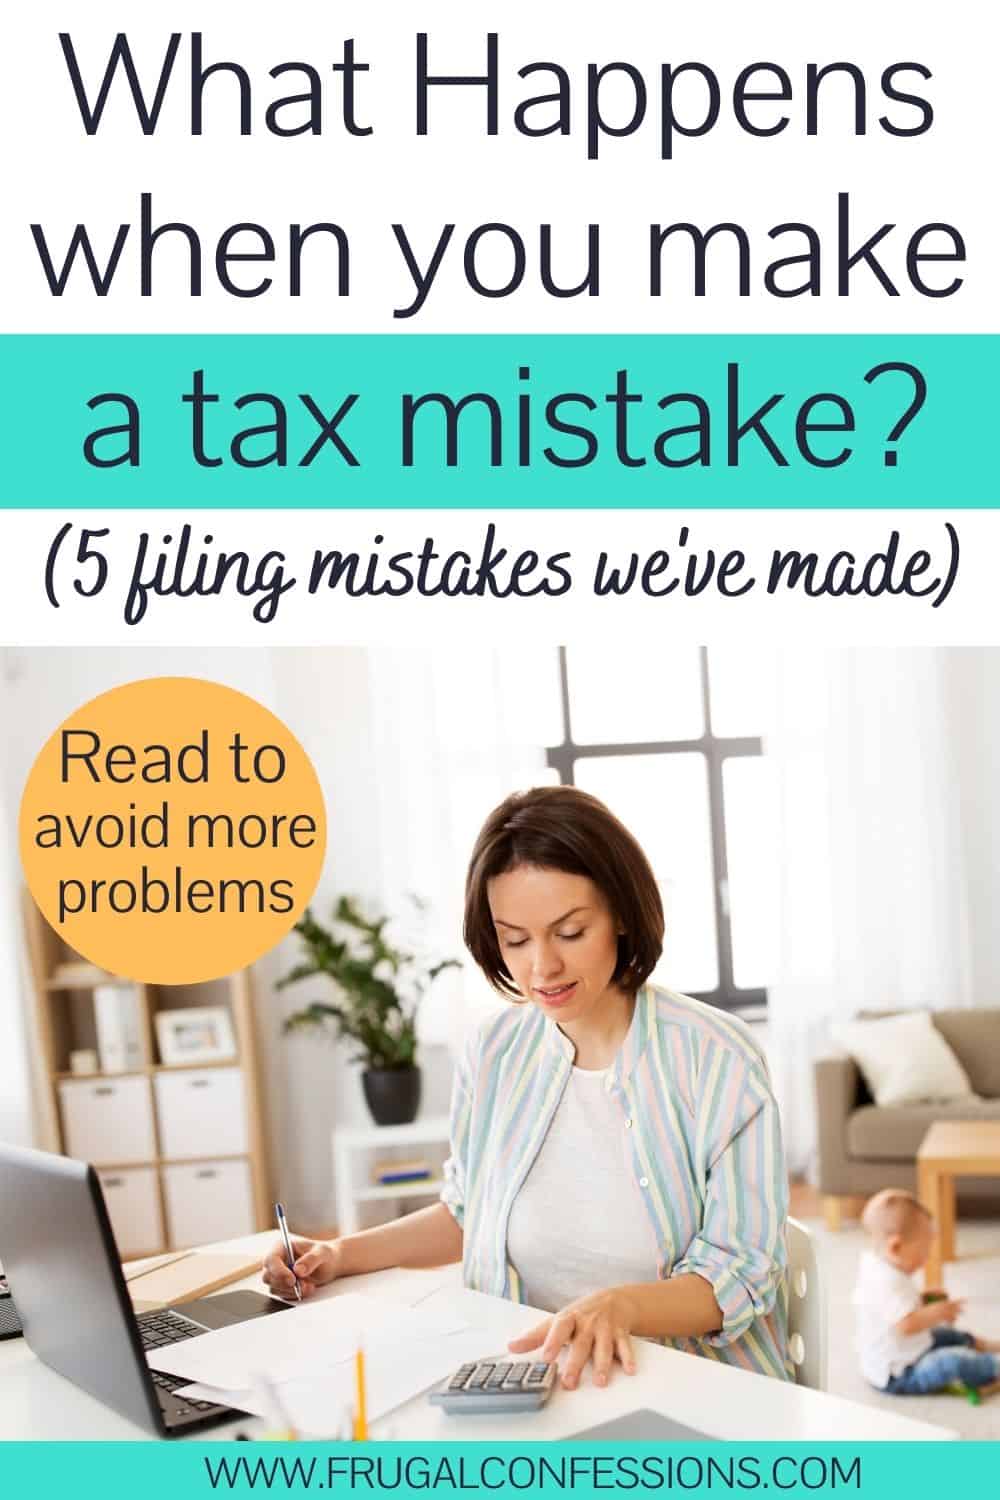 woman at desk working on taxes, text overlay 